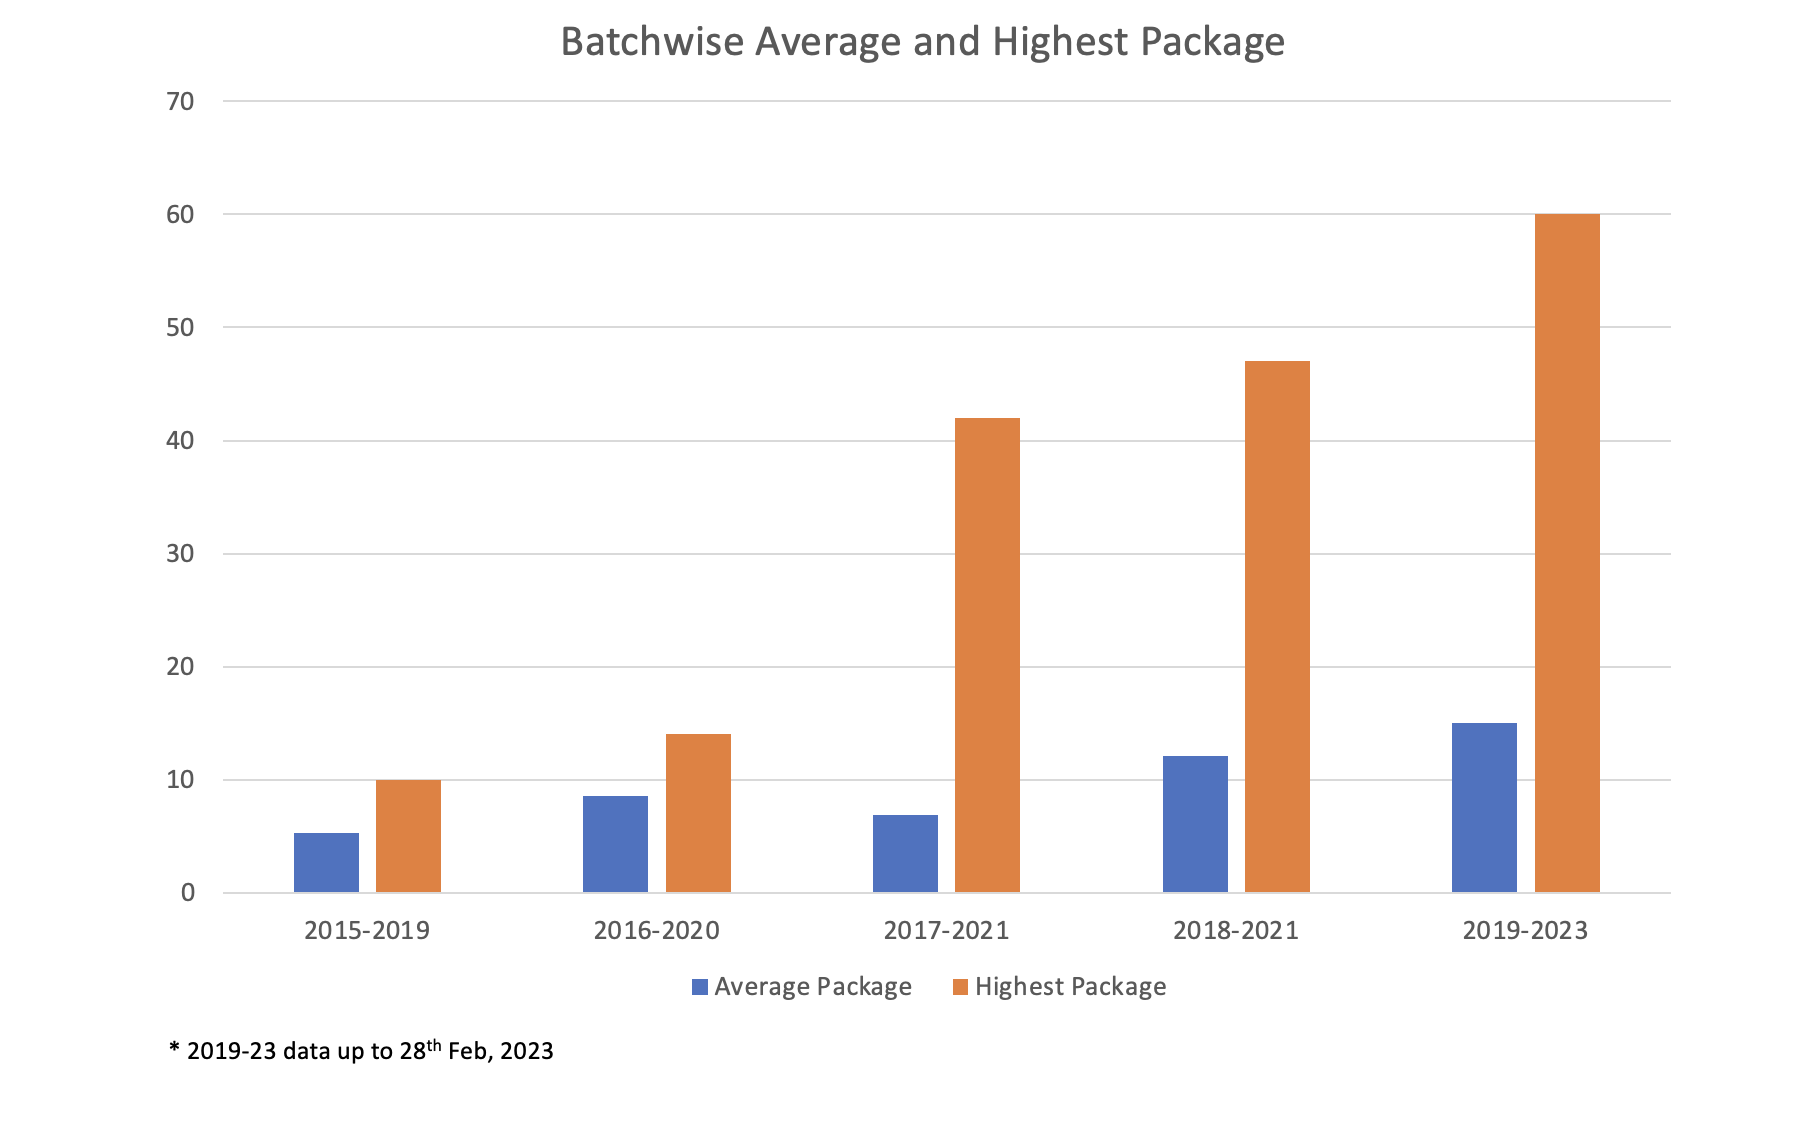 Batch wise Average and Highest Package